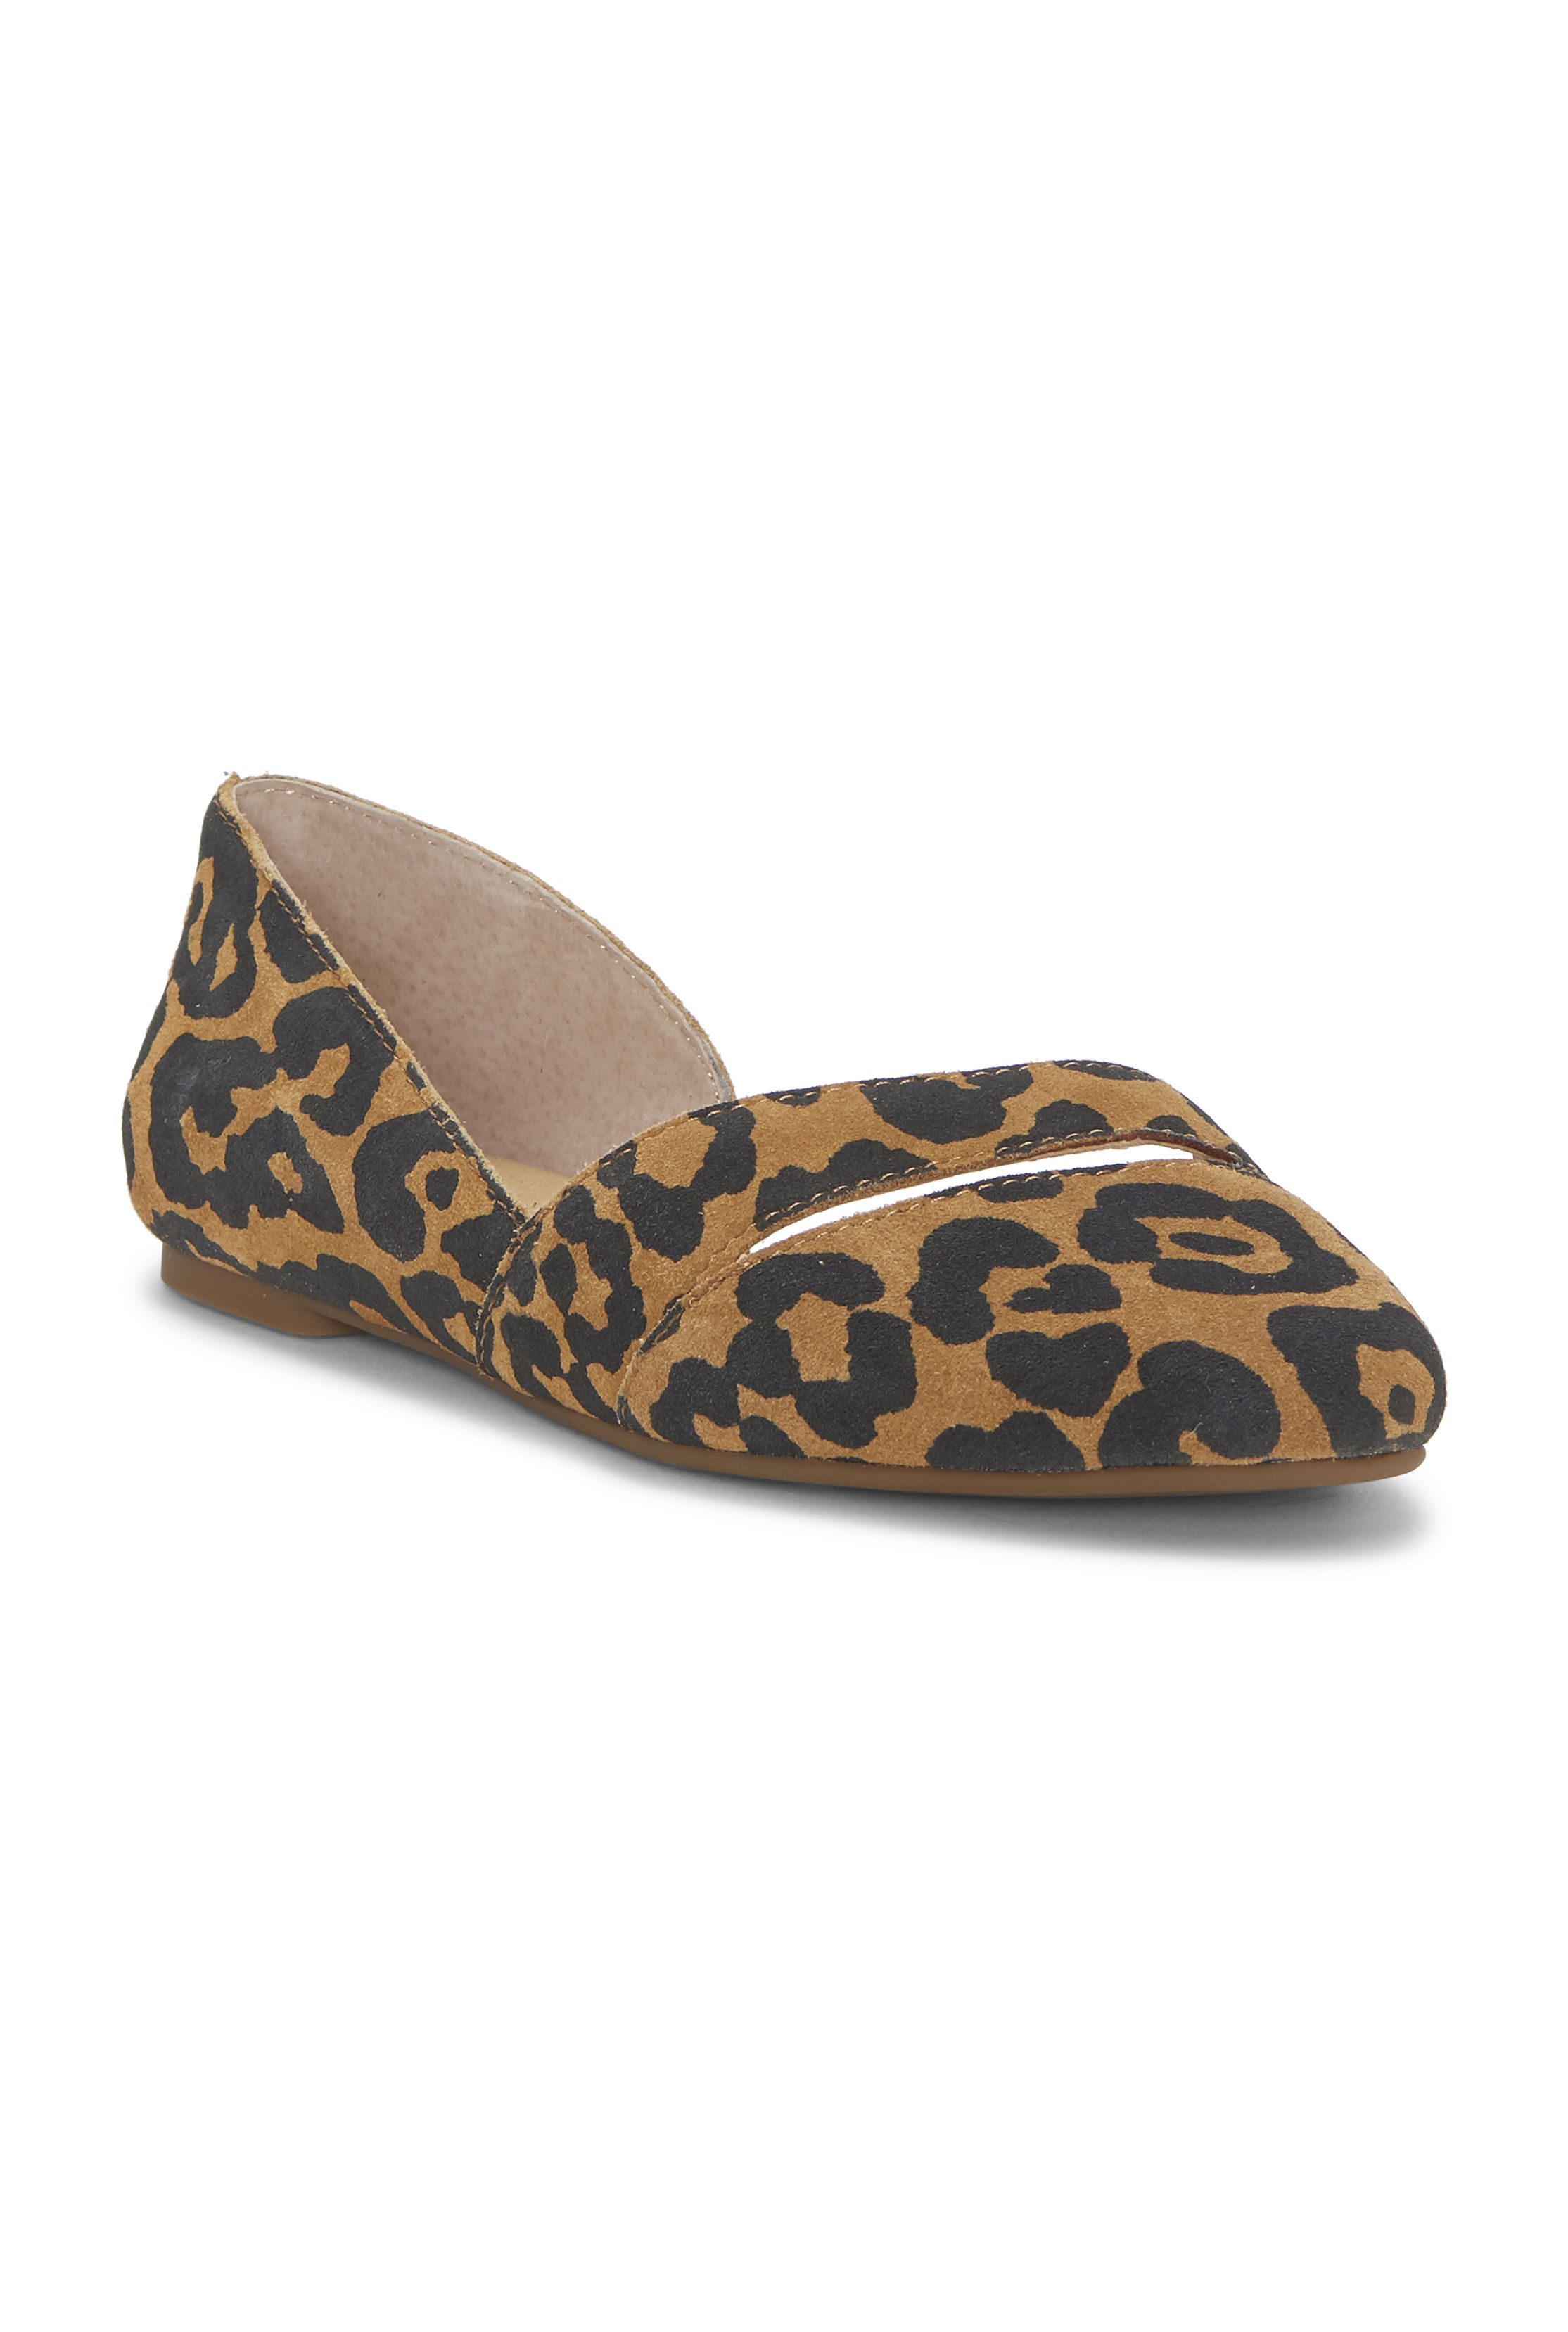 lucky brand leopard loafers